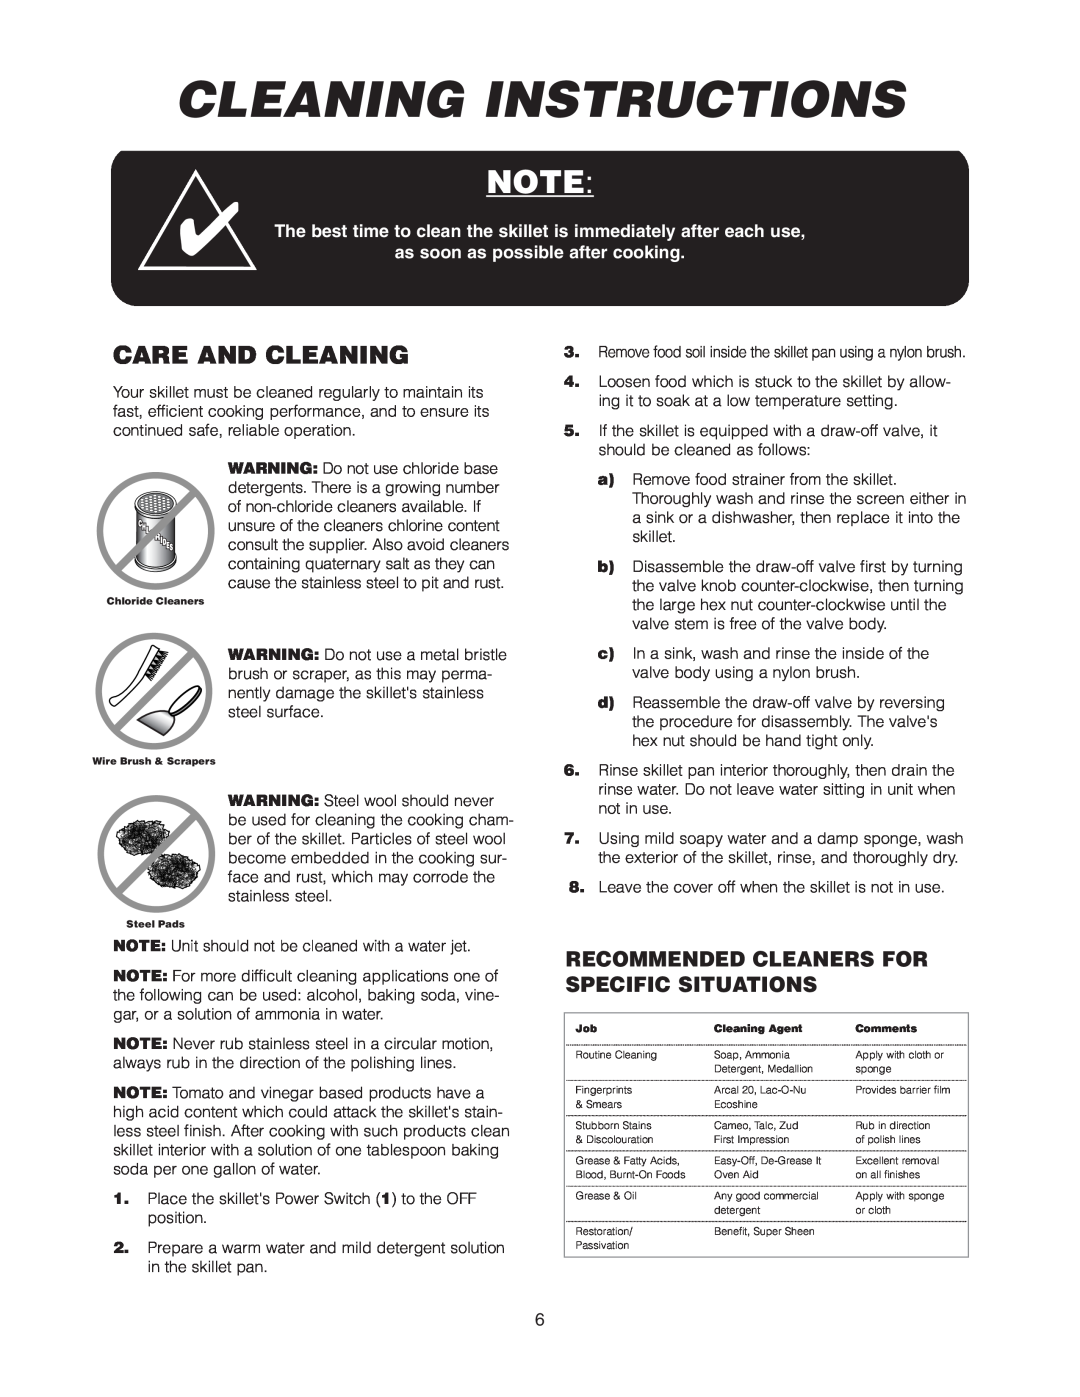 Cleveland Range SEL-40-T1 manual Cleaning Instructions, Care And Cleaning, Recommended Cleaners For Specific Situations 